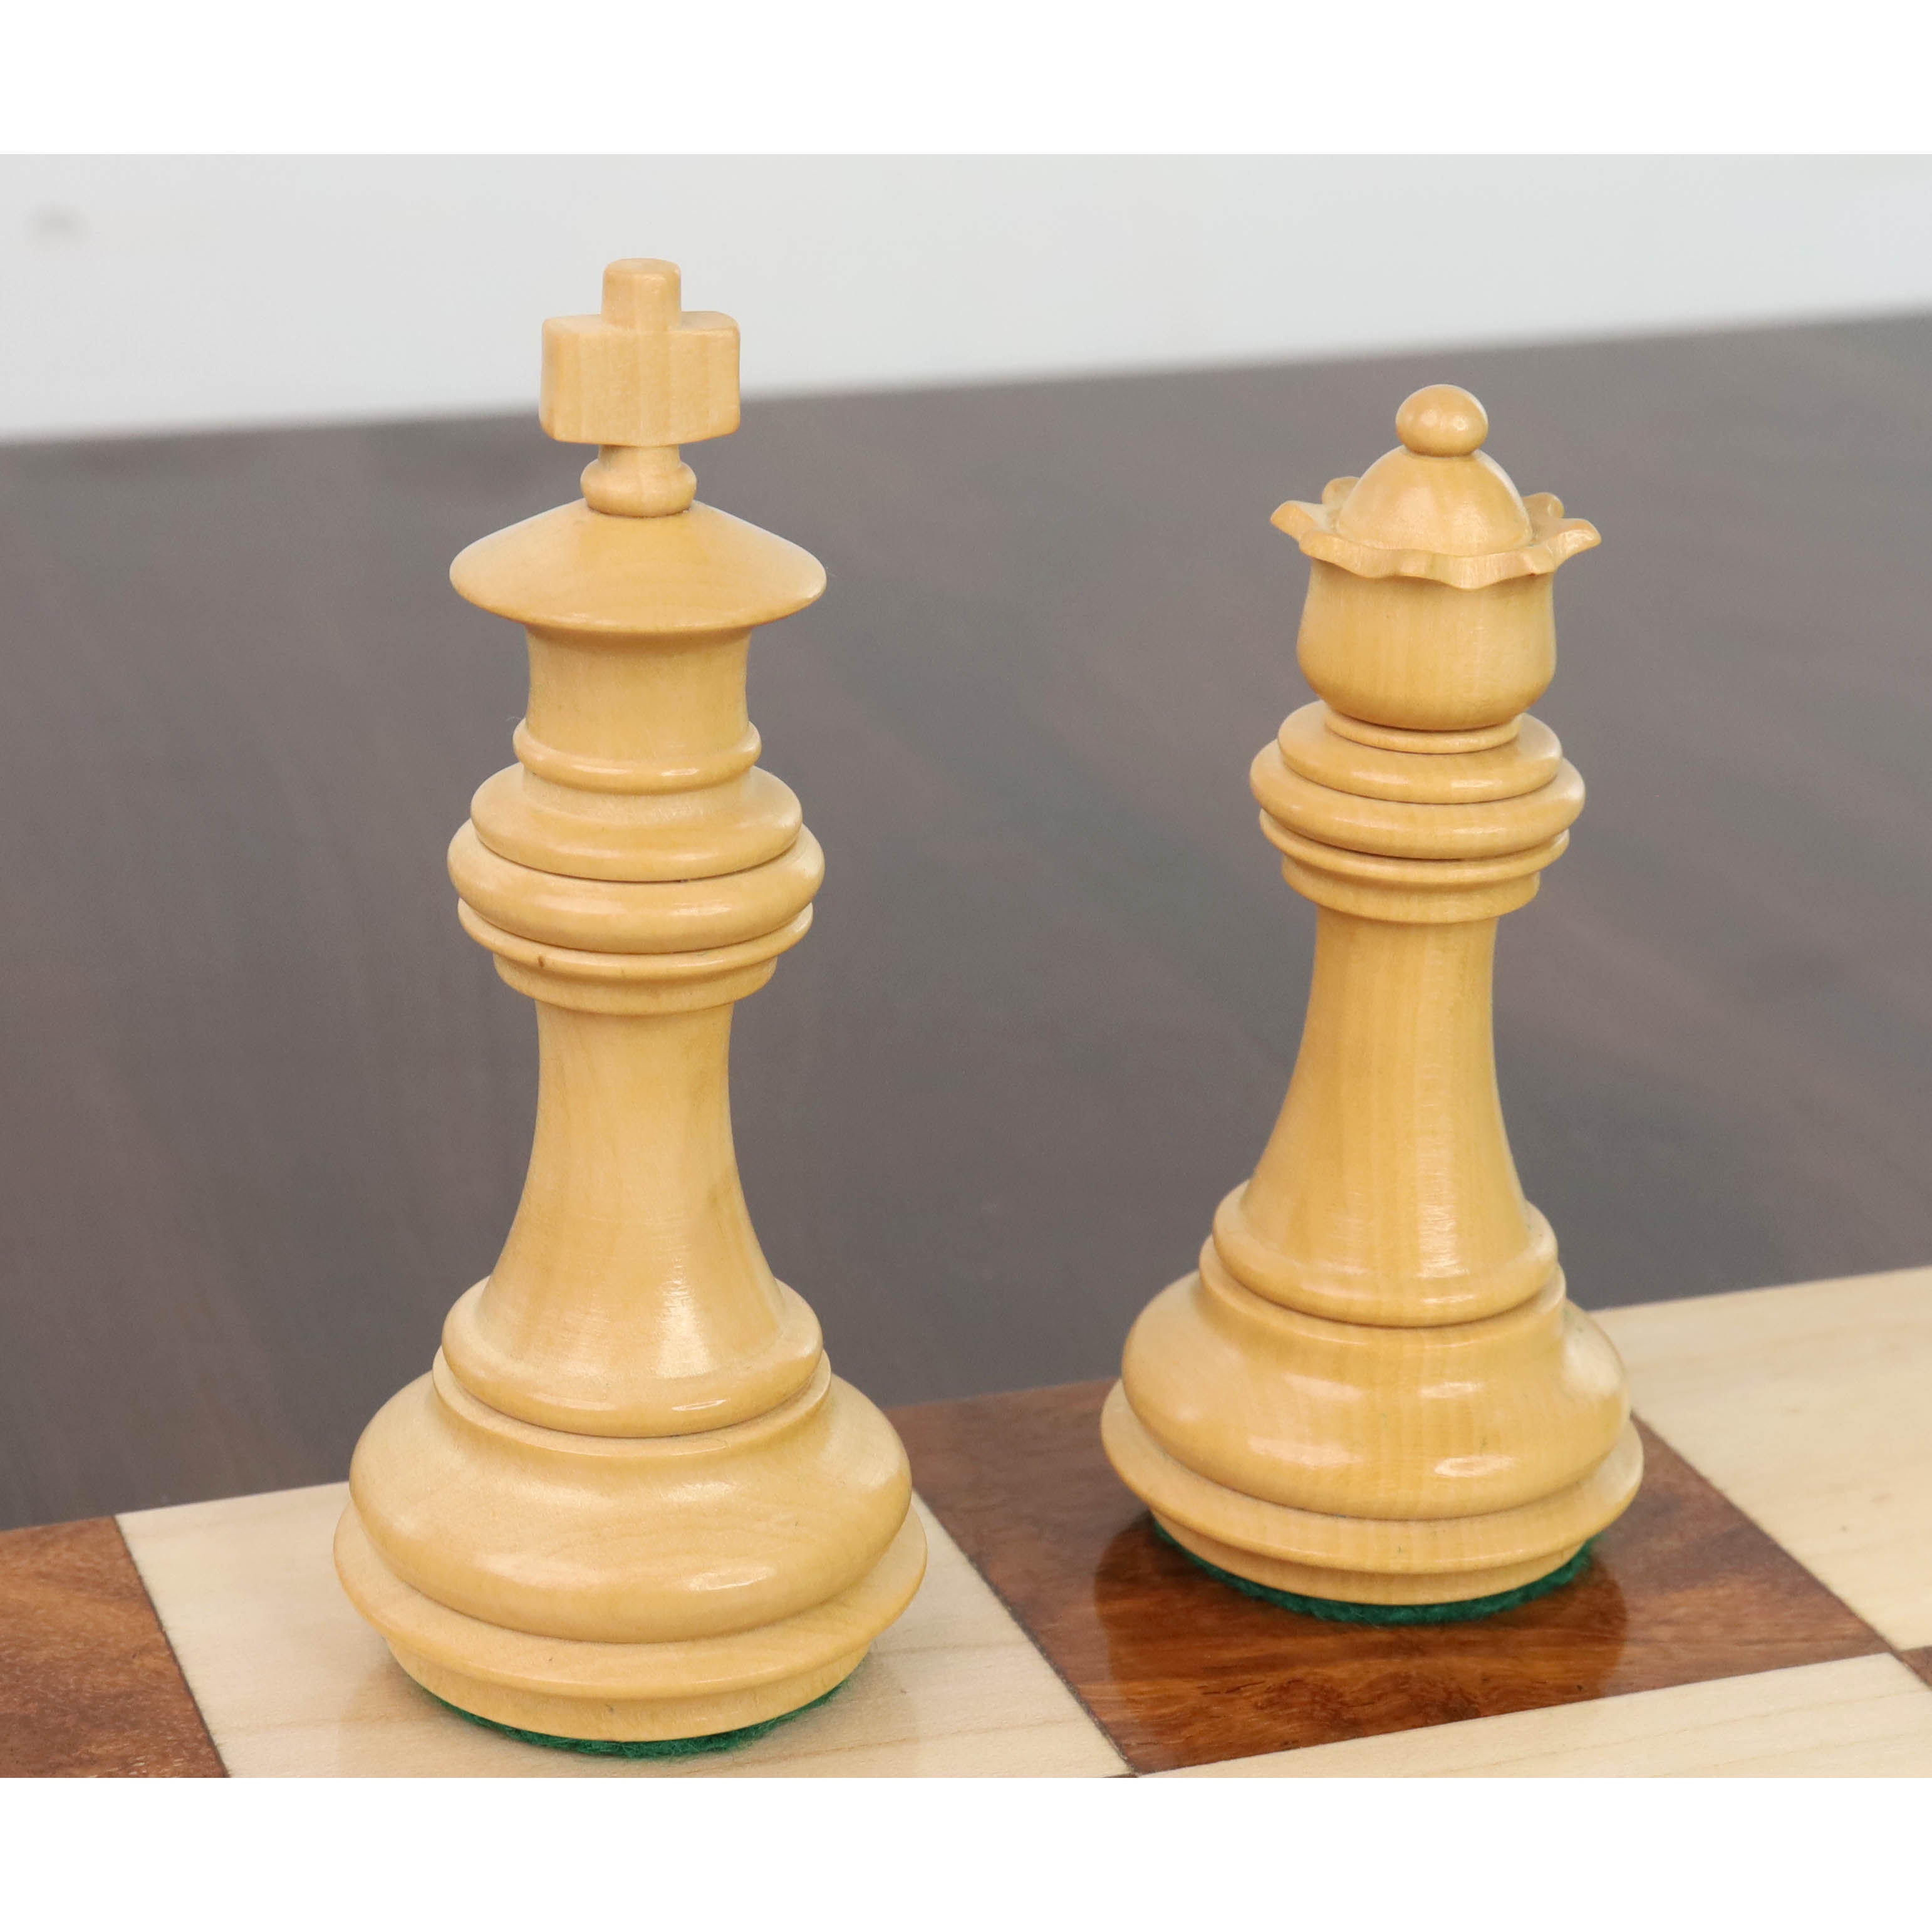 3.4" Meghdoot Series Staunton Chess Pieces Only set - Weighted Golden Rosewood